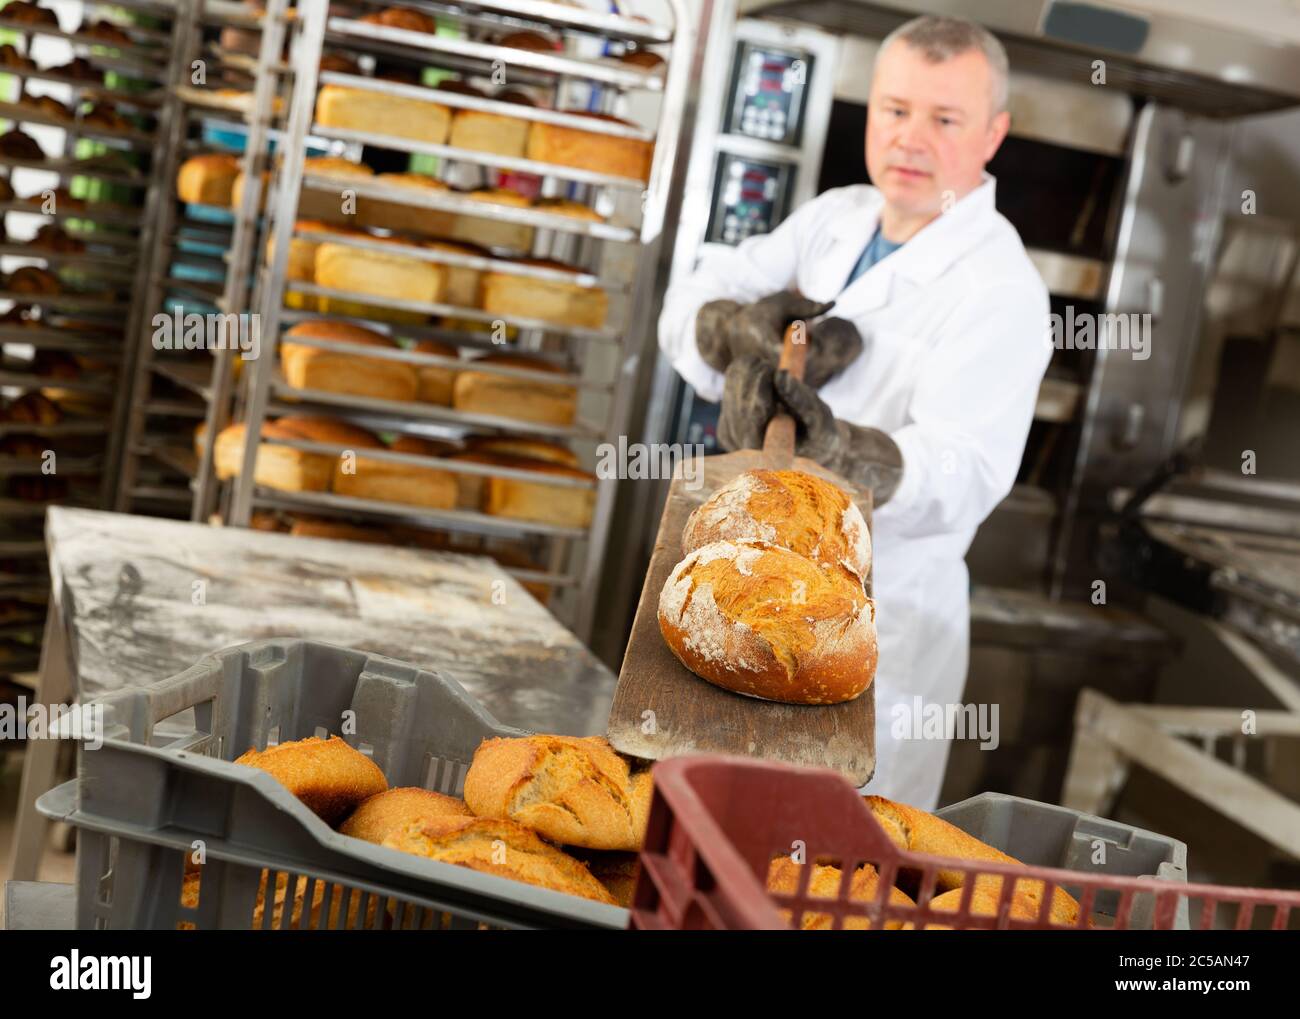 Professional baker taking out freshly baked hot bread from oven in small bakery Stock Photo